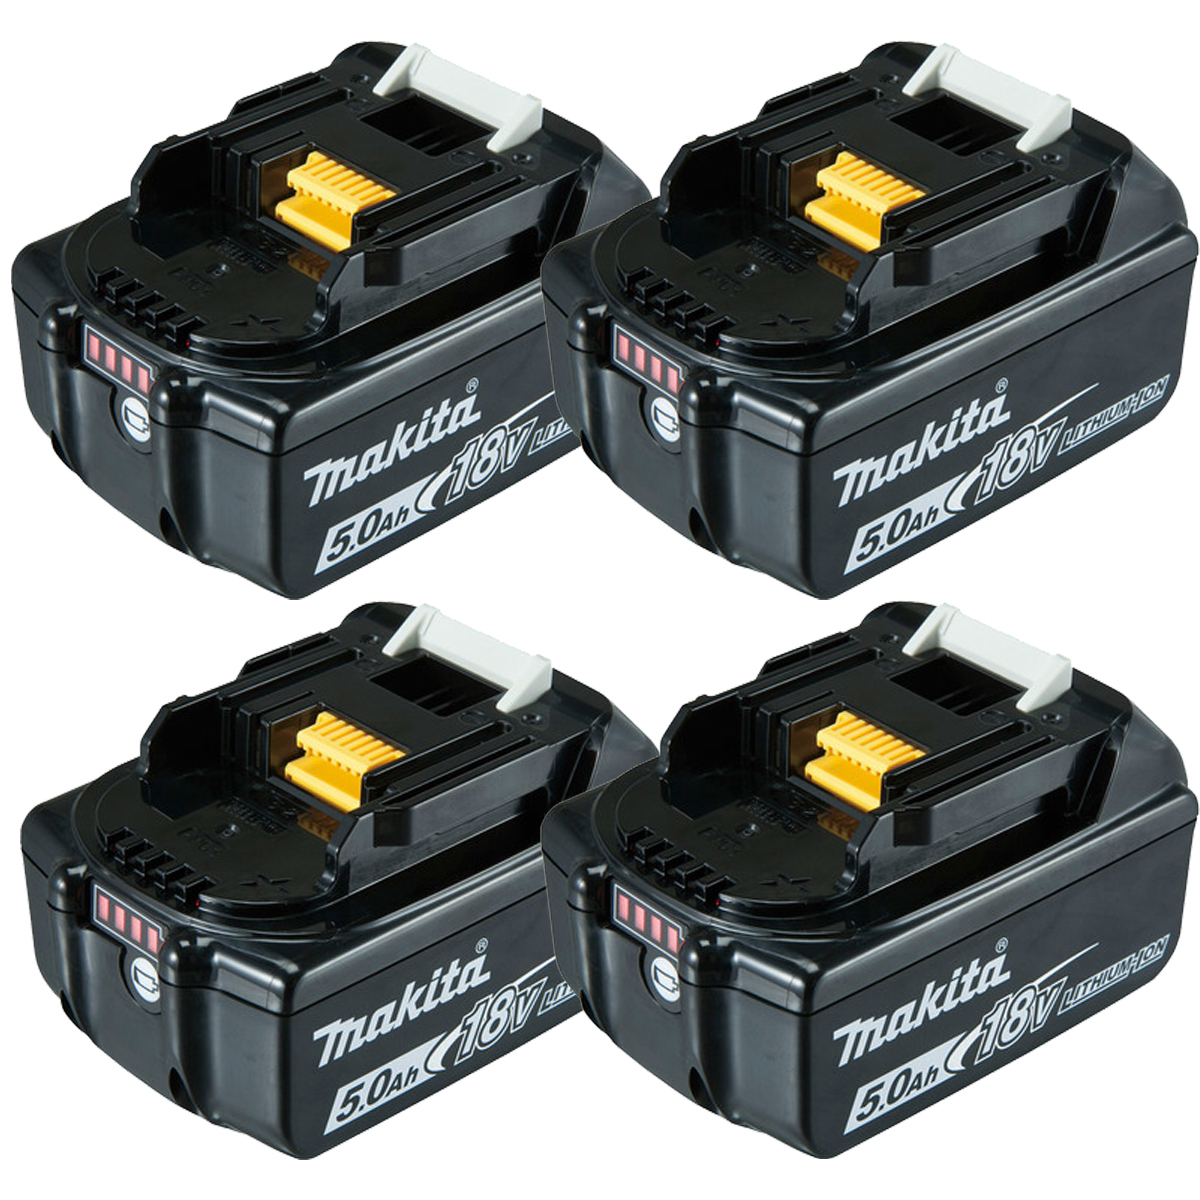 Makita 18V 5.0Ah Lithium Battery with Charge Indicator x 4